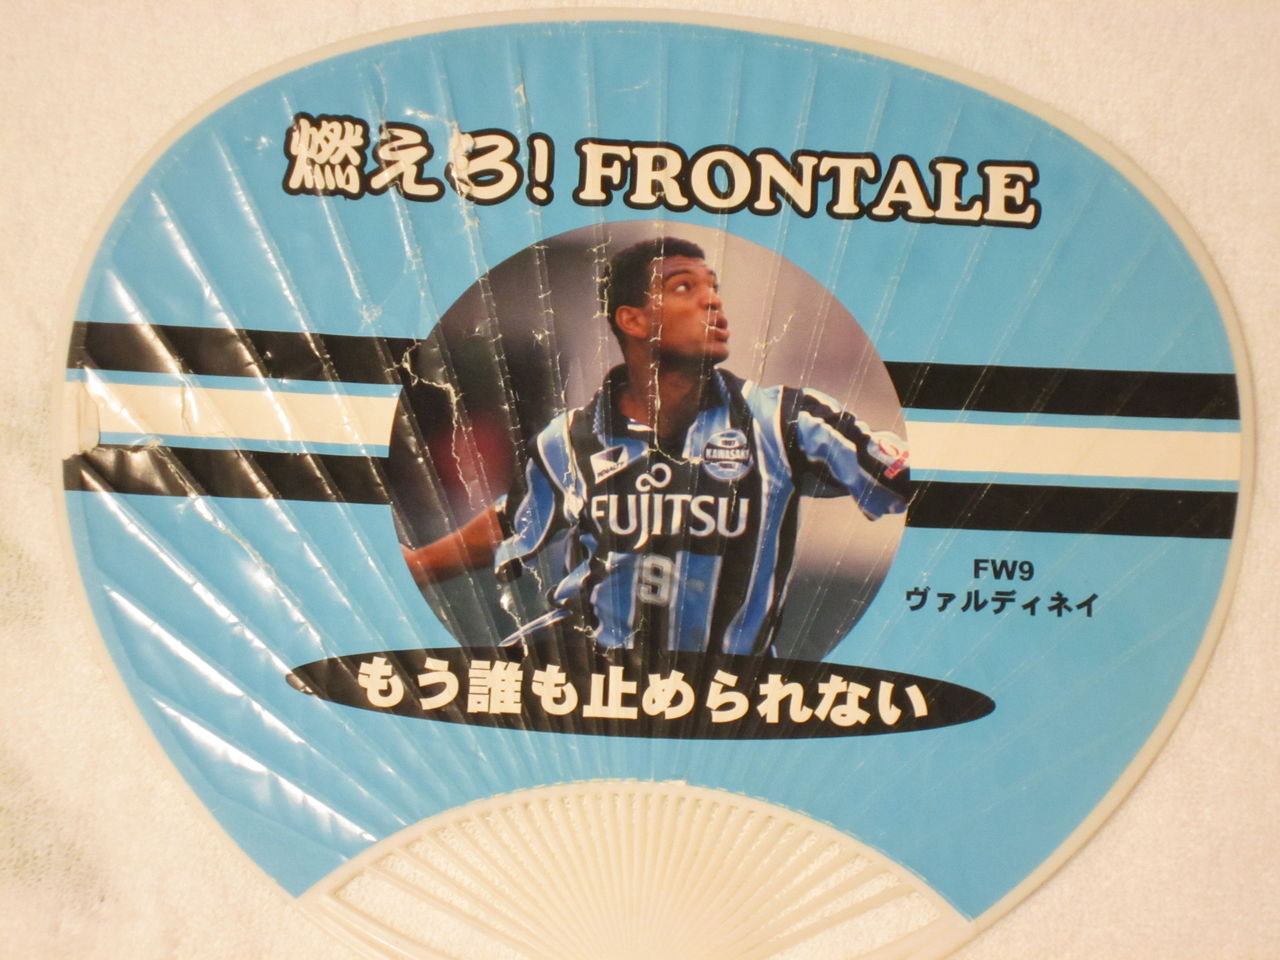 My Favorite チャント フロンターレ編 Blue Is The Colour Football Is The Game